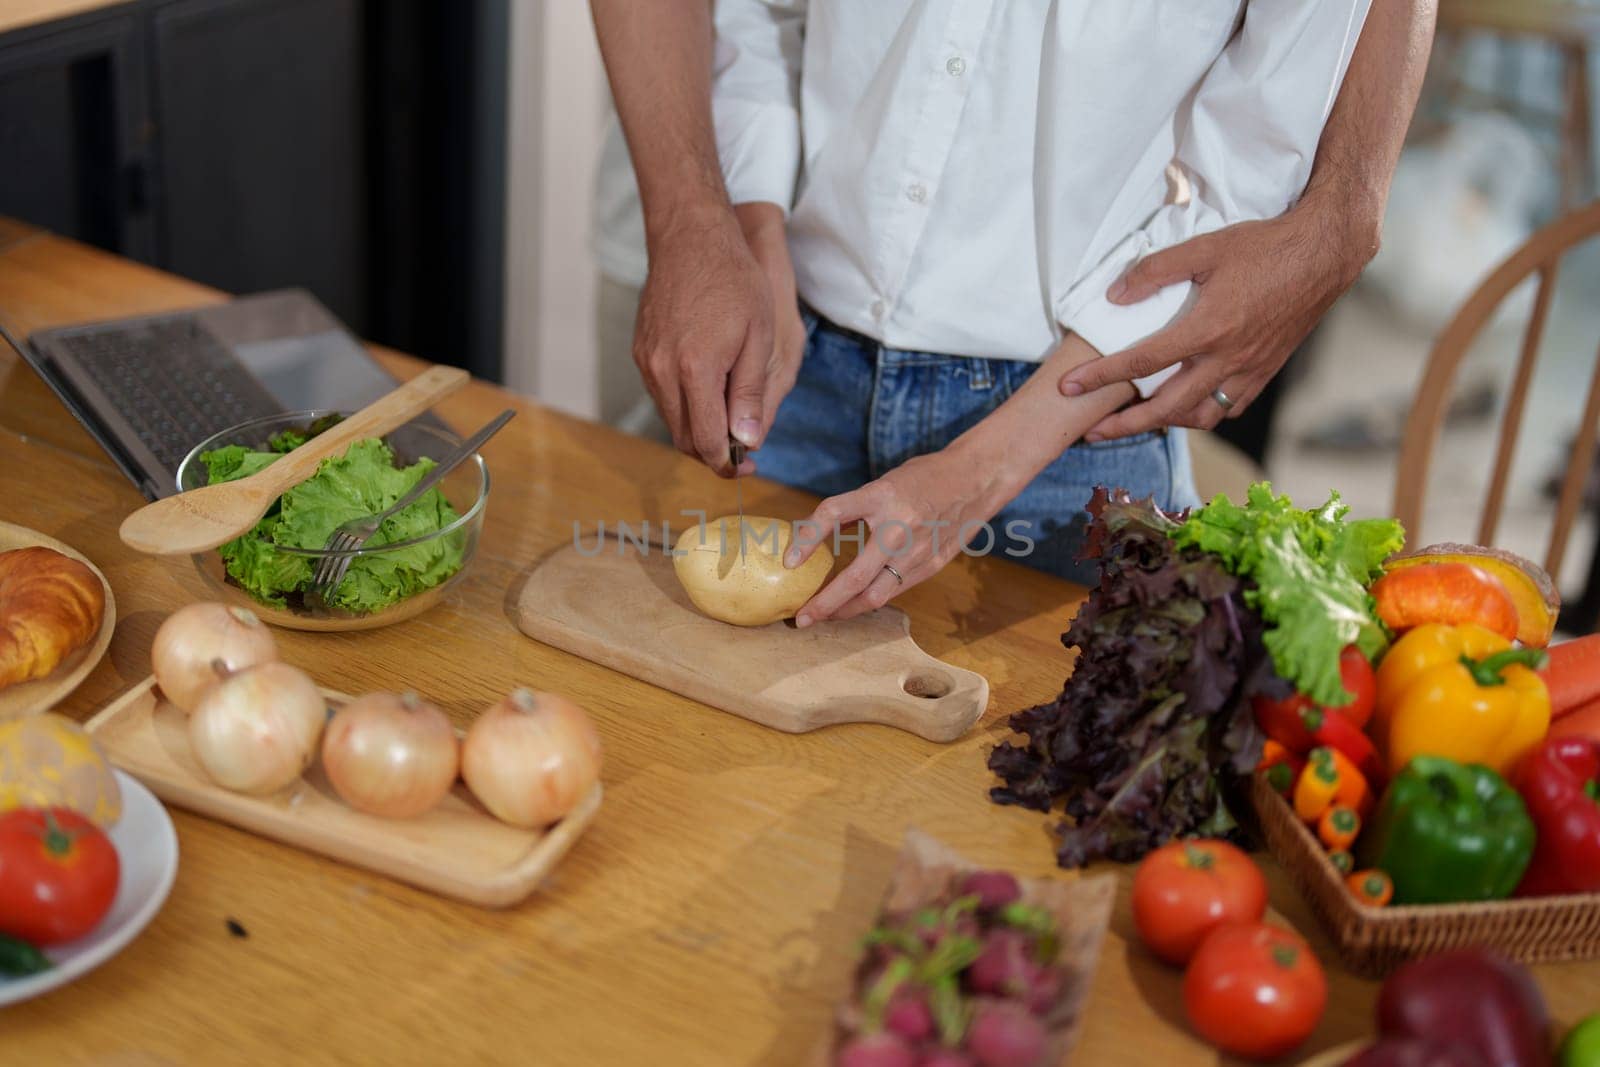 Couple cutting potatoes to cook or make salad in home kitchen